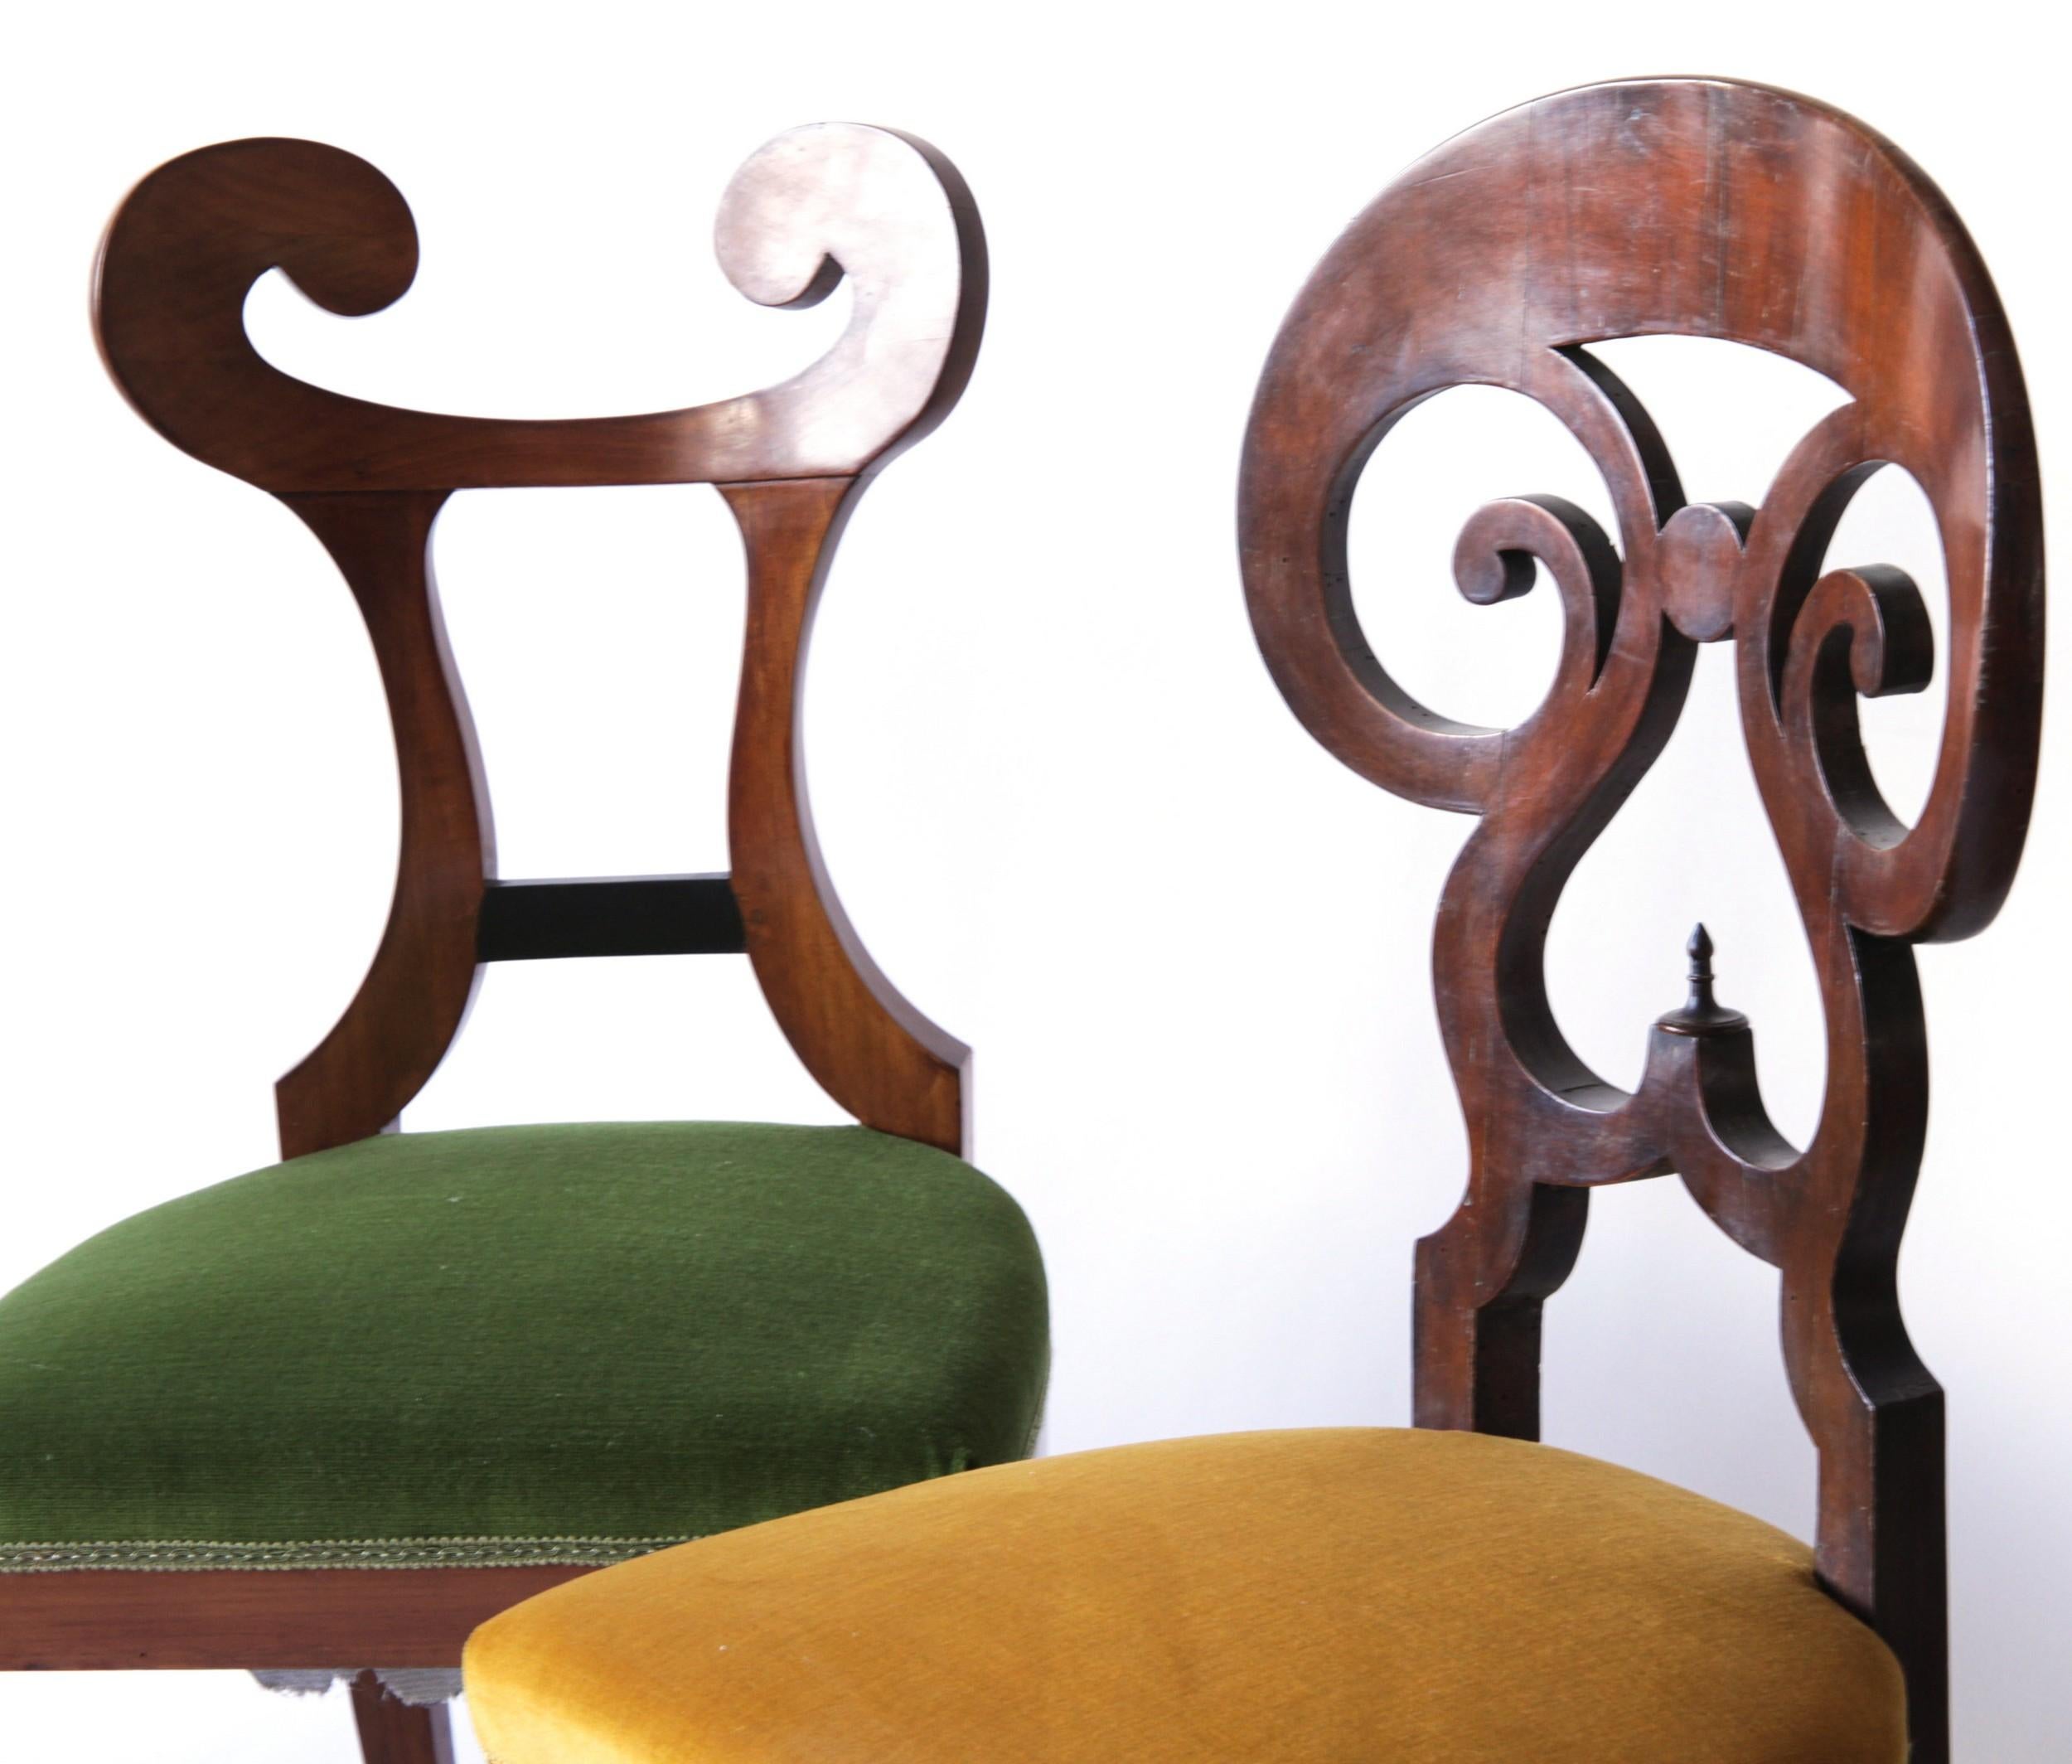 I'm proposing here an incredible Biedermeier set. Made of eight different style of chairs. 

An profusion of cherry, walnut wood, carvings and curves used at the time with the designs that made the style so popular. Carvings, curves

Just an